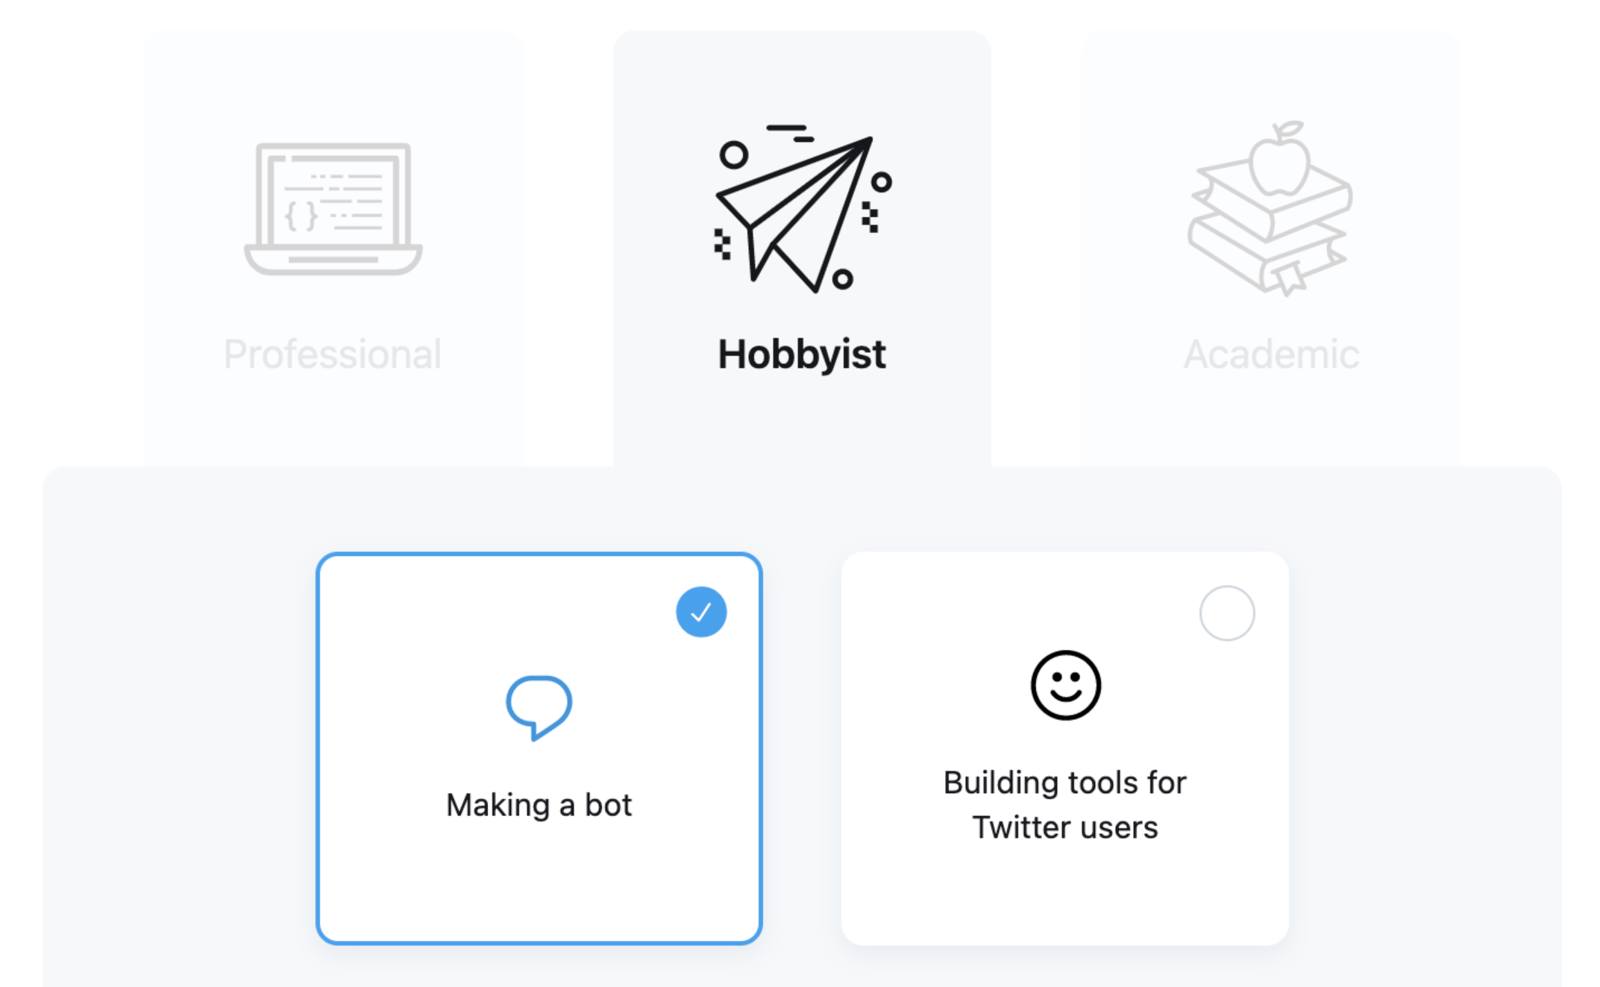 Twitter developer application - which best describes you question with Hobbyist and Making a bot options selected